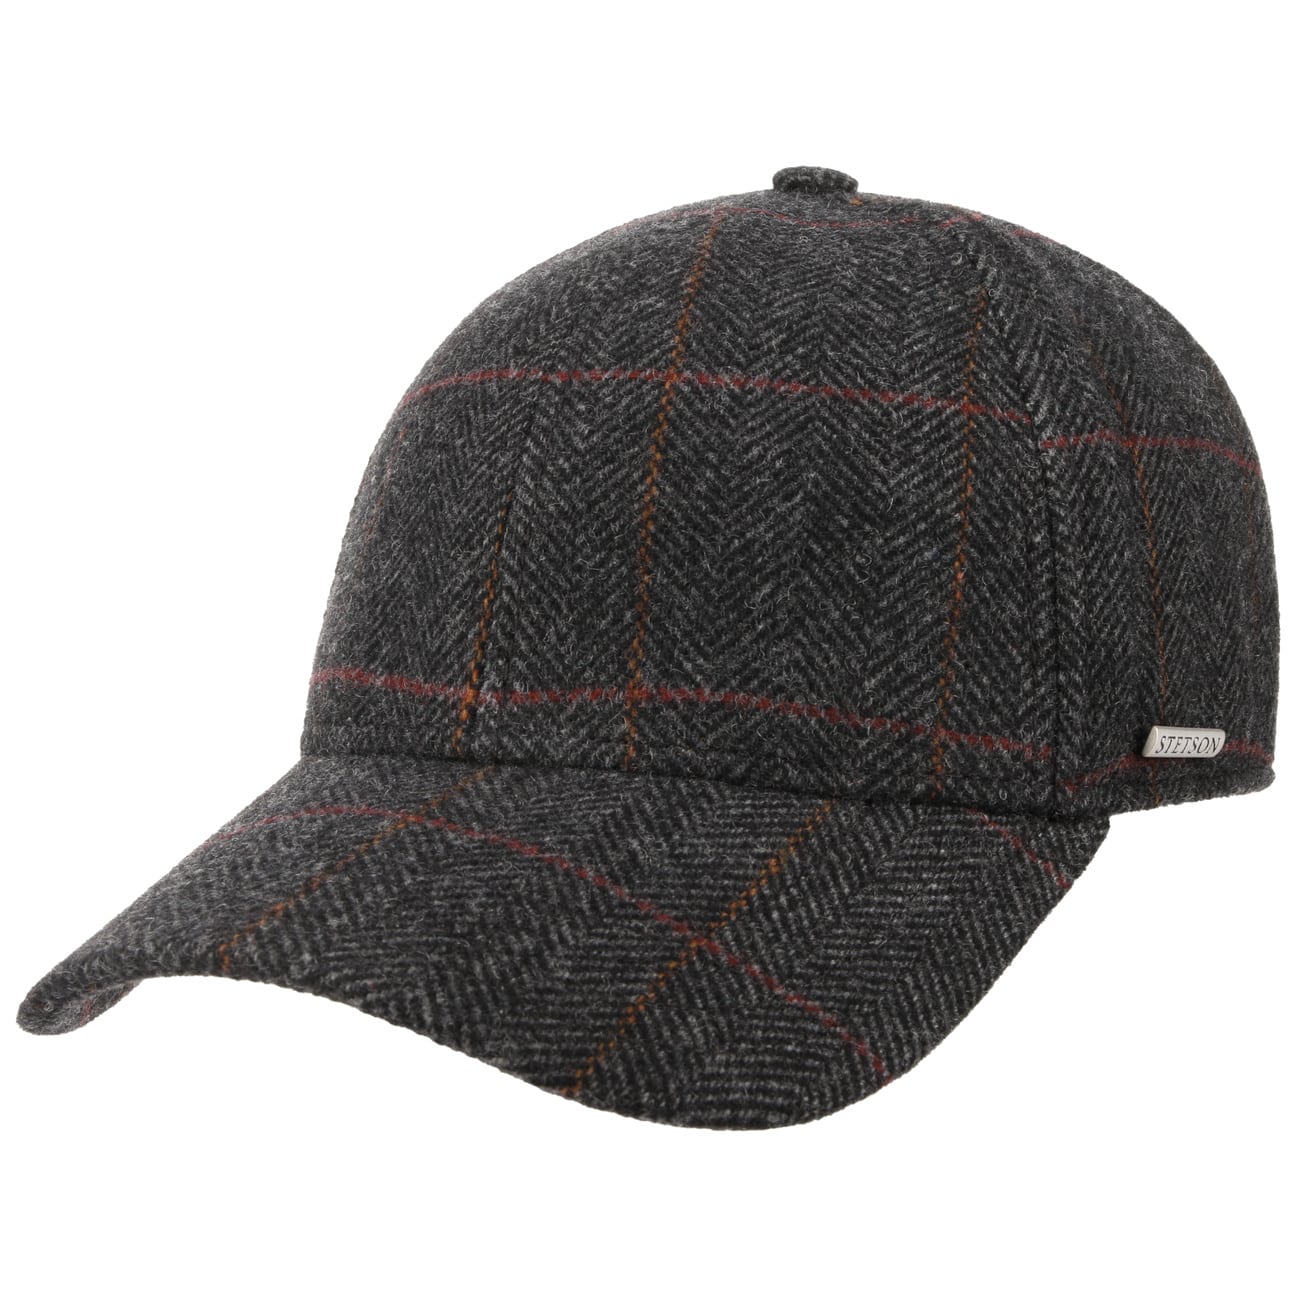 € Kinty | Ohrenklappen 69,00 mit Stetson Wool by Basecap